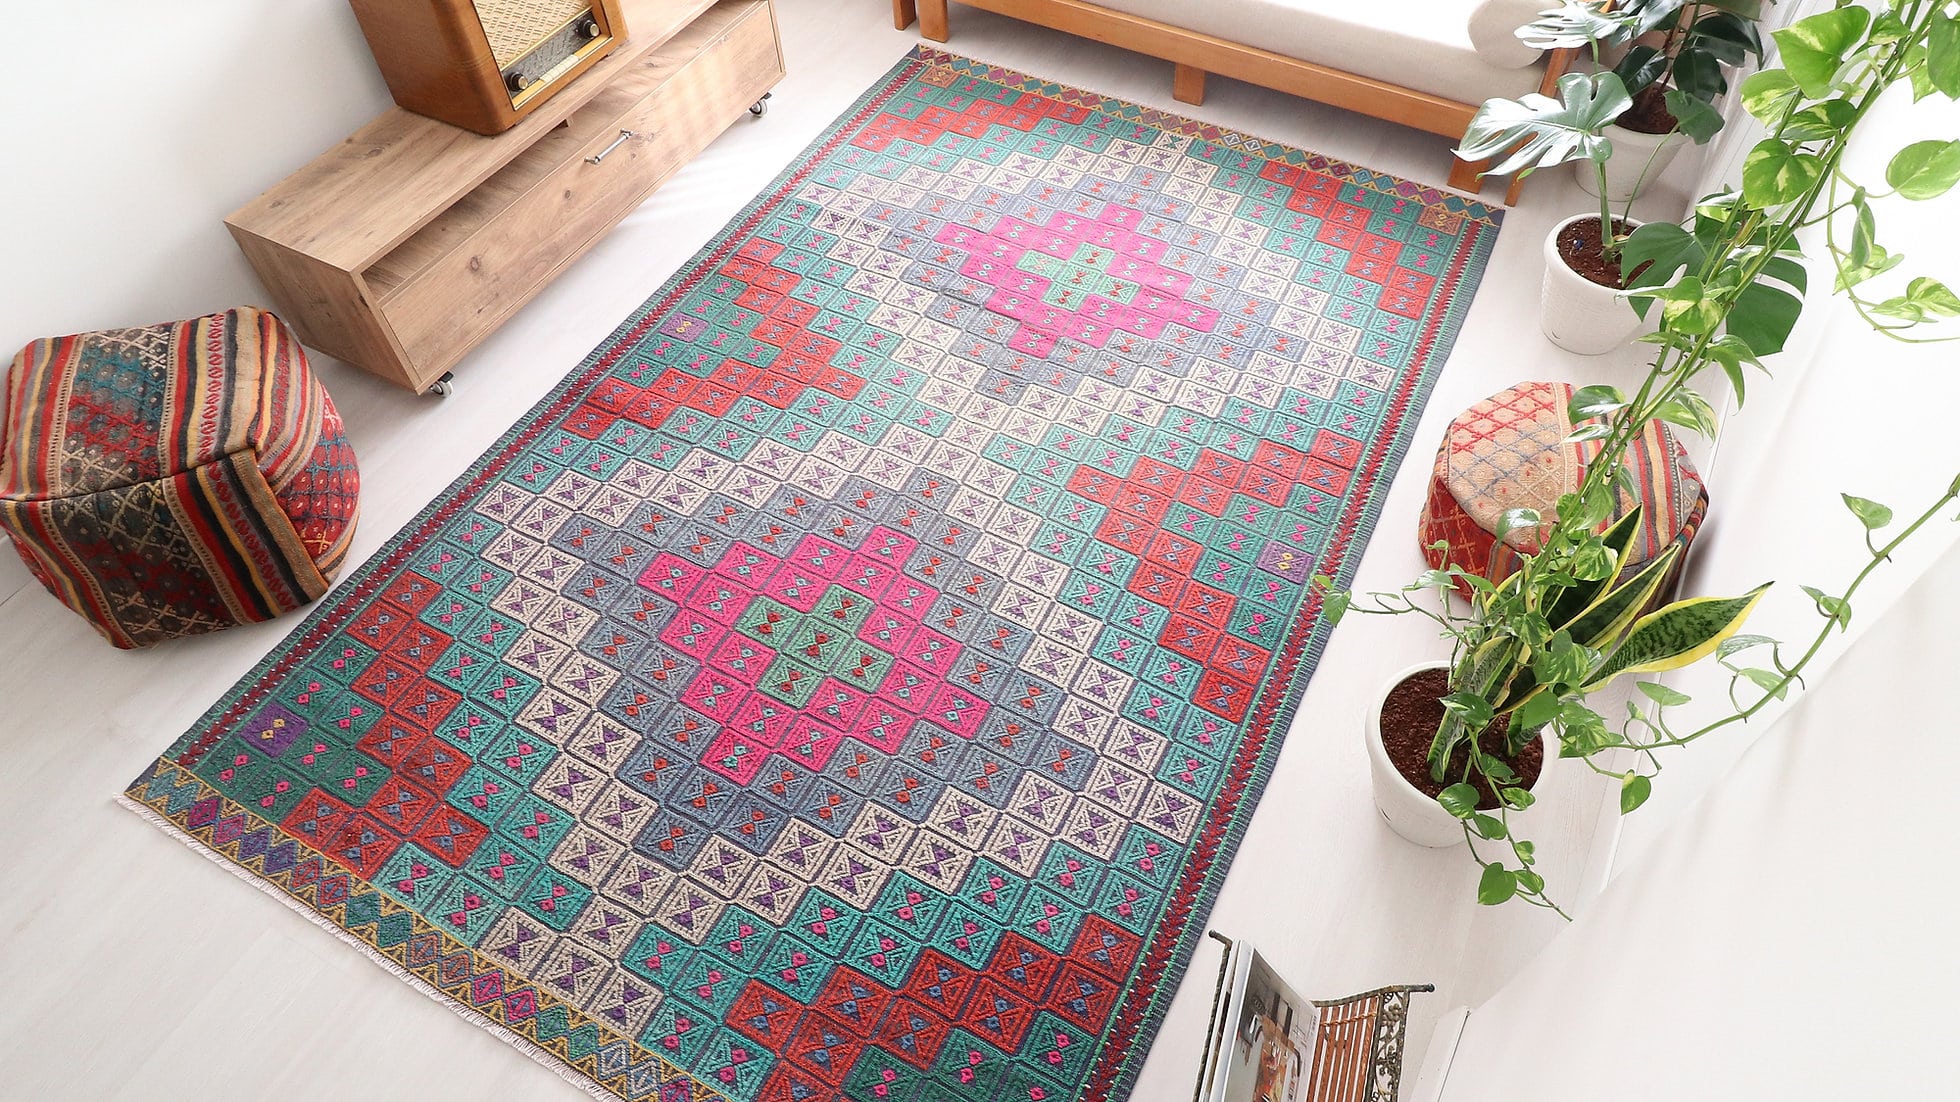 Vintage hand woven Cecim Kilim Rug with faded hues in pink, red and green